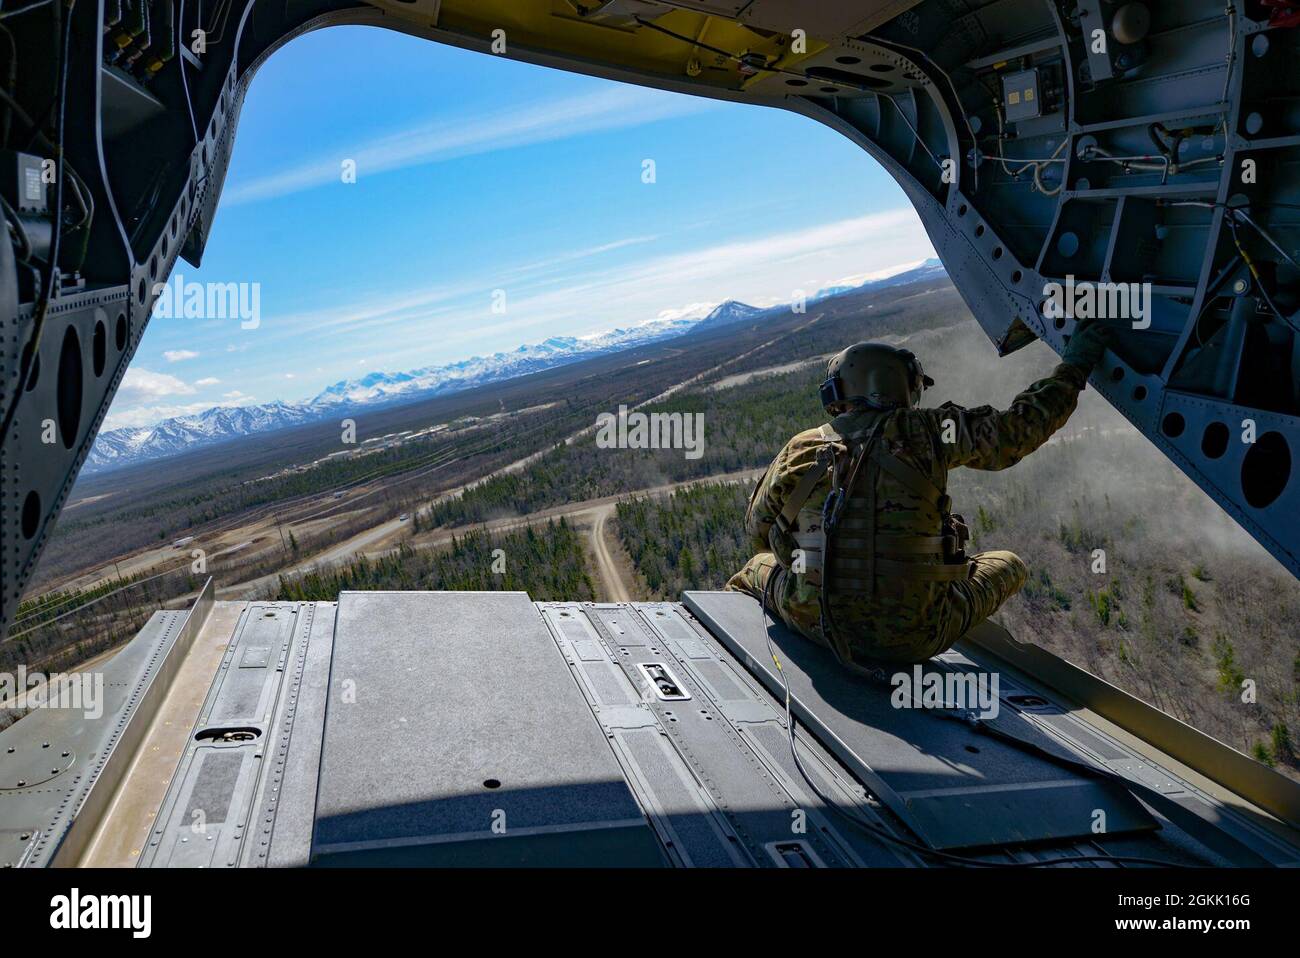 U.S. Army Staff Sgt. Manuel Rodriguez, a CH-47F Chinook helicopter flight engineer from B Company, 1st Battalion, 52nd Aviation Regiment, observes the environment during Northern Edge 2021 (NE21) over the Joint Pacific Alaska Range Complex (JPARC) May 10, 2021. The JPARC consists of approximately 65,000 square miles of available airspace, 2,490 square miles of land space with 1.5 million acres of maneuver land and 42,000 square nautical miles of surface, subsurface and overlaying airspace. Northern Edge 2021 is a U.S. Indo-Pacific Command sponsored, Headquarters Pacific Air Forces led, U.S.-on Stock Photo